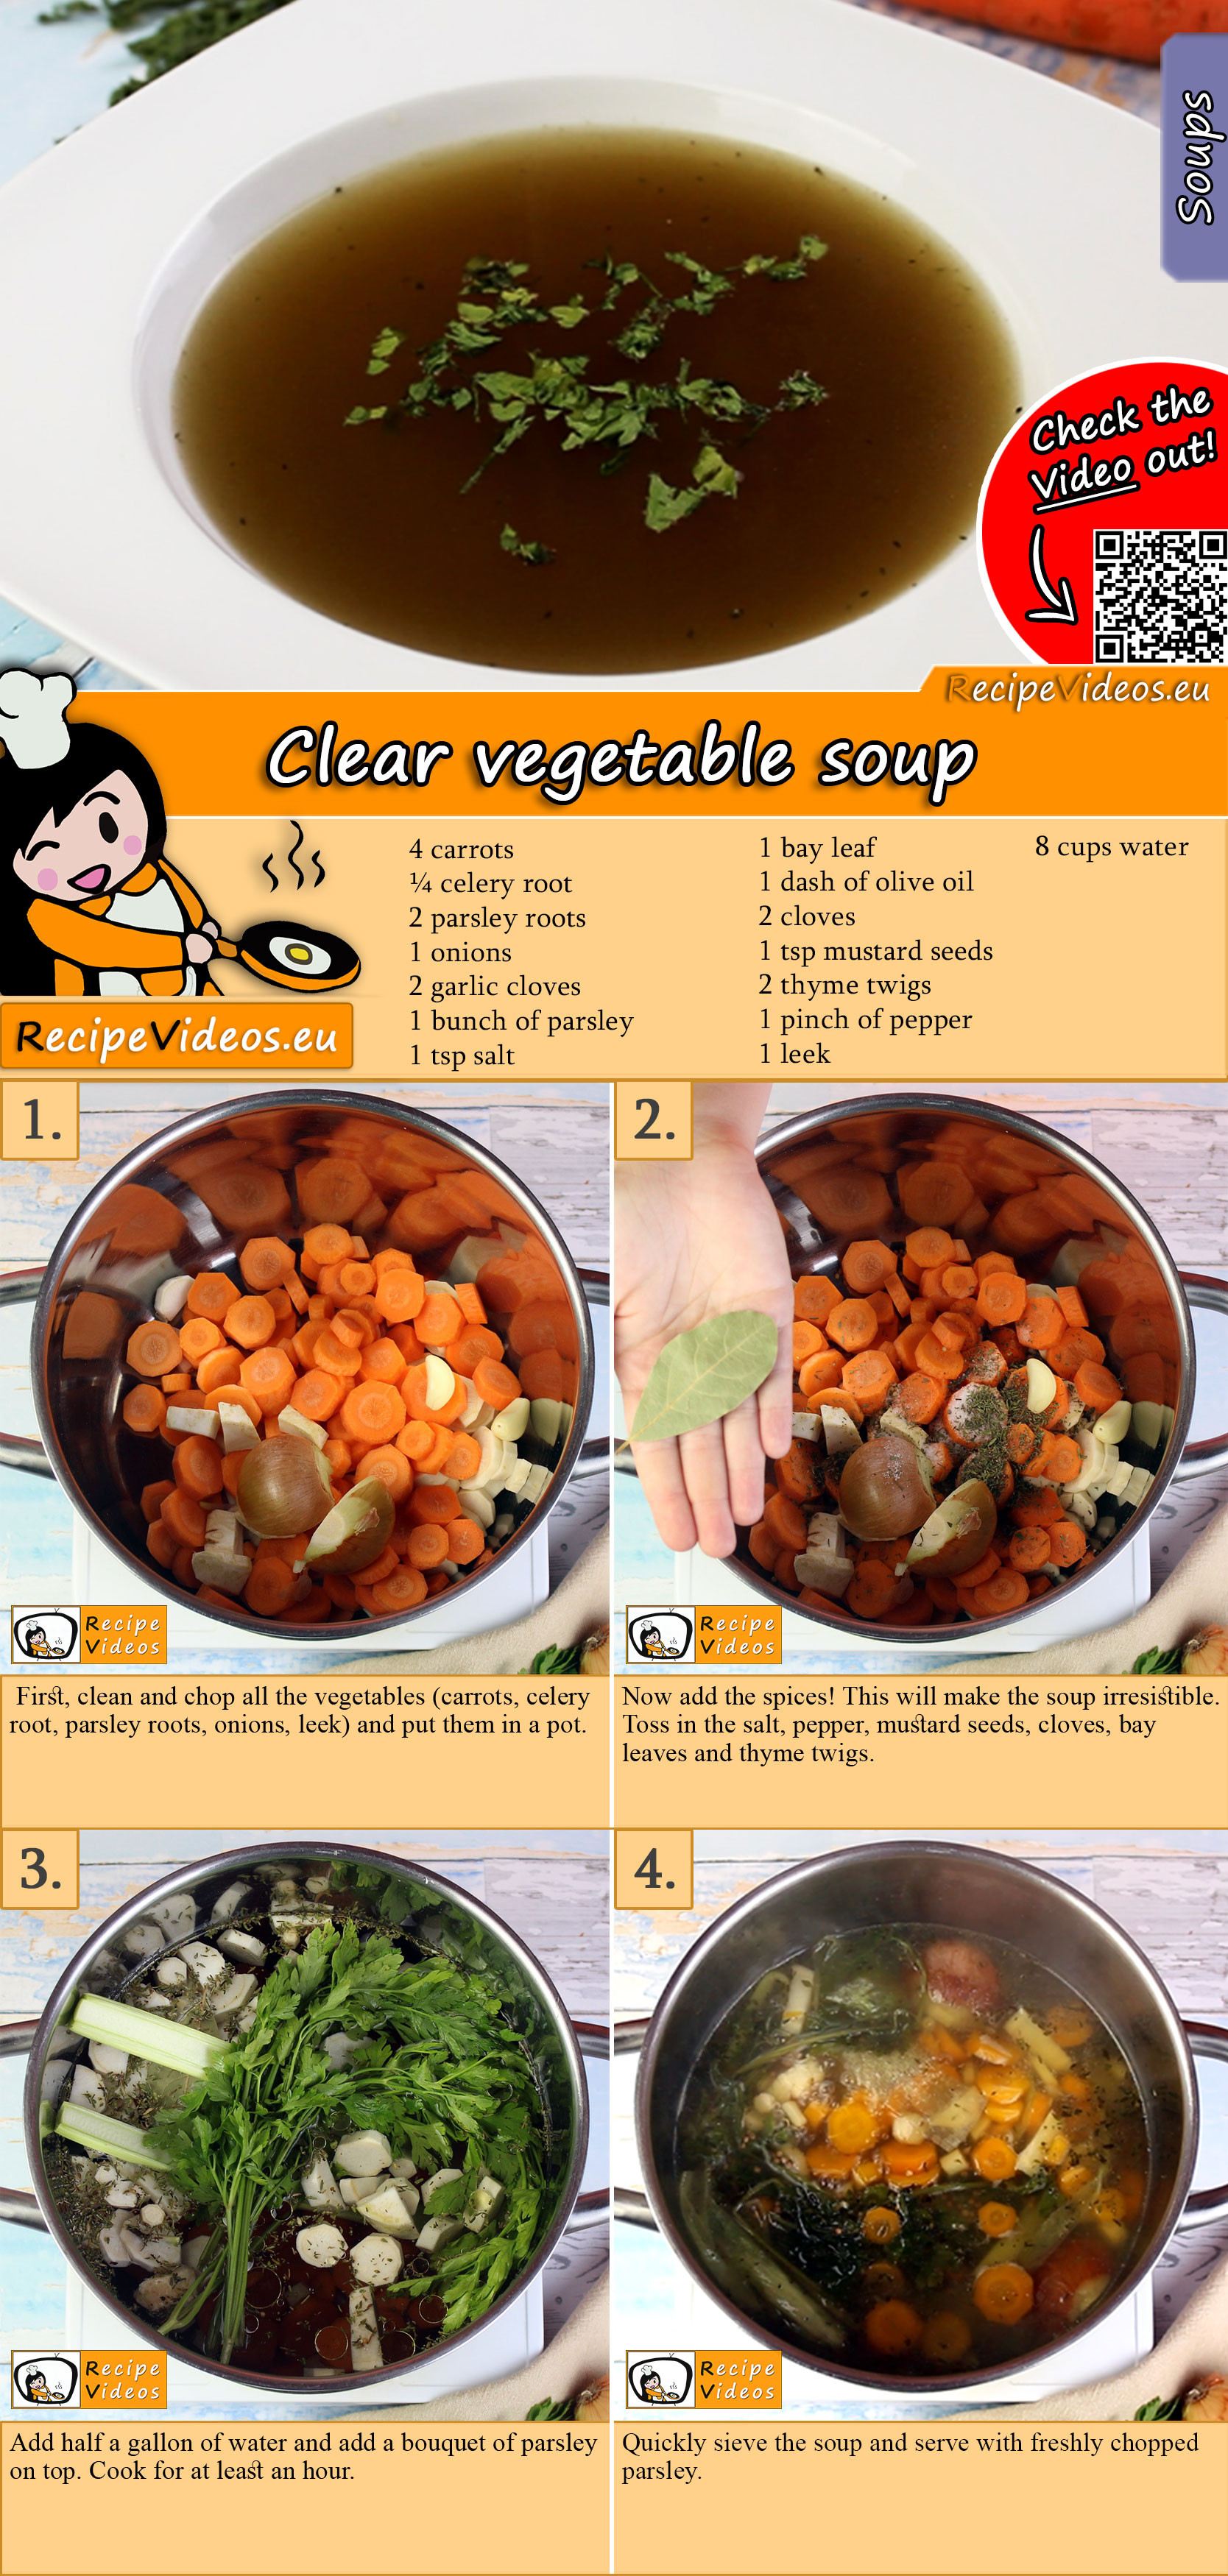 Clear vegetable soup recipe with video